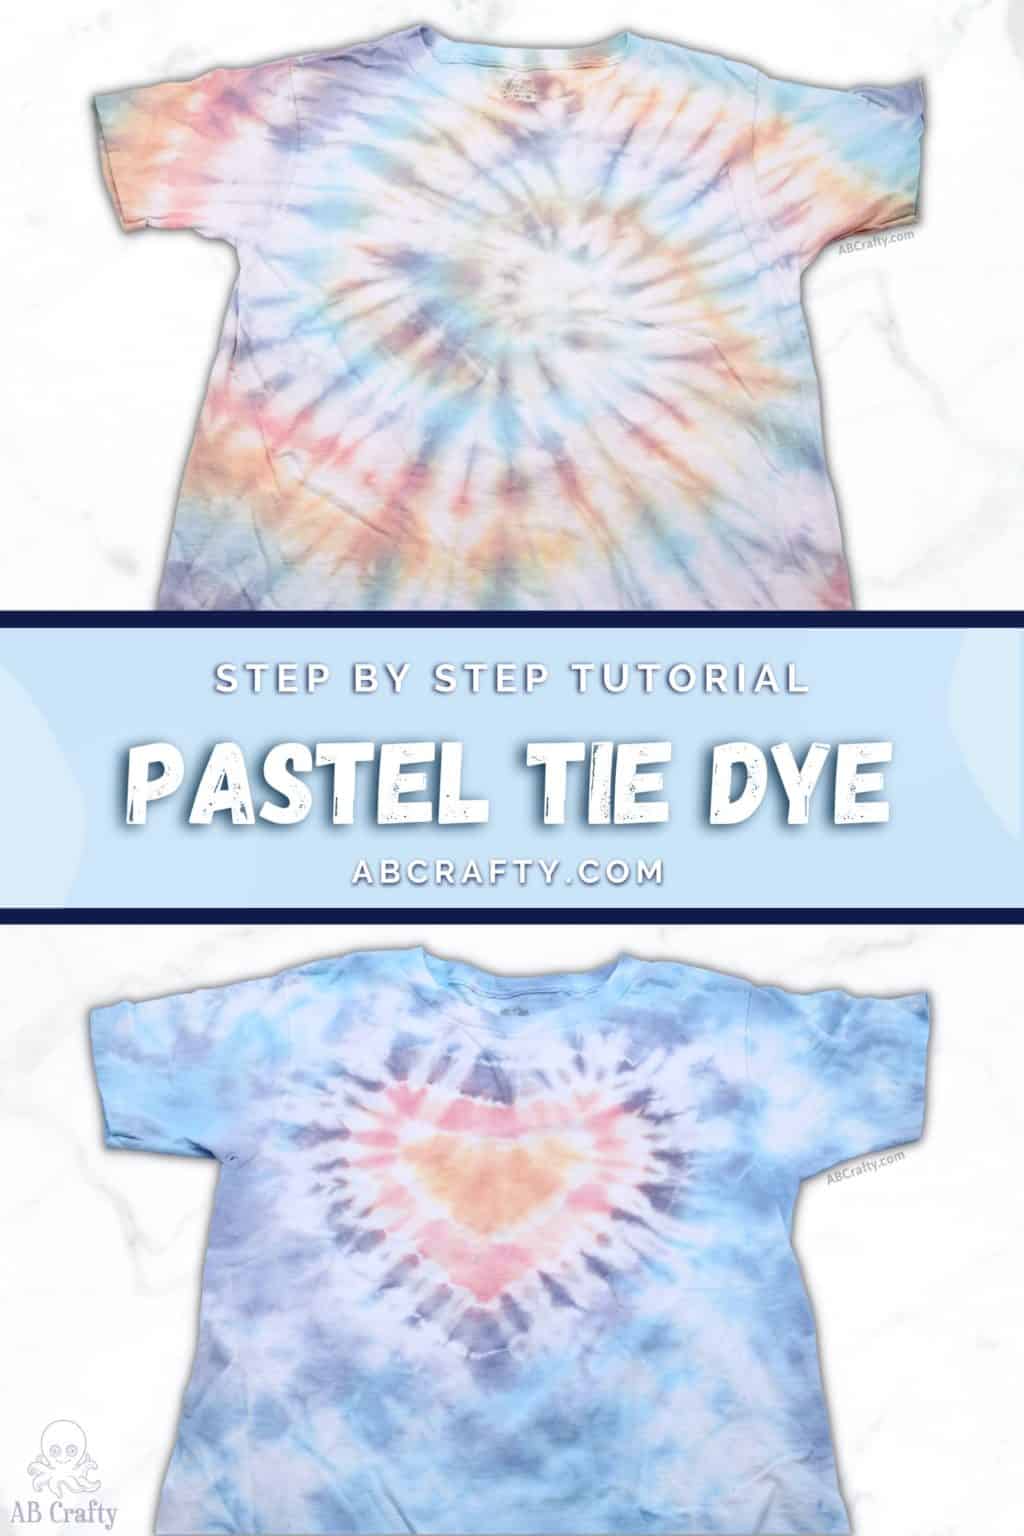 Two color Navy and Orange Wave Spiral Tie-dye T-shirt